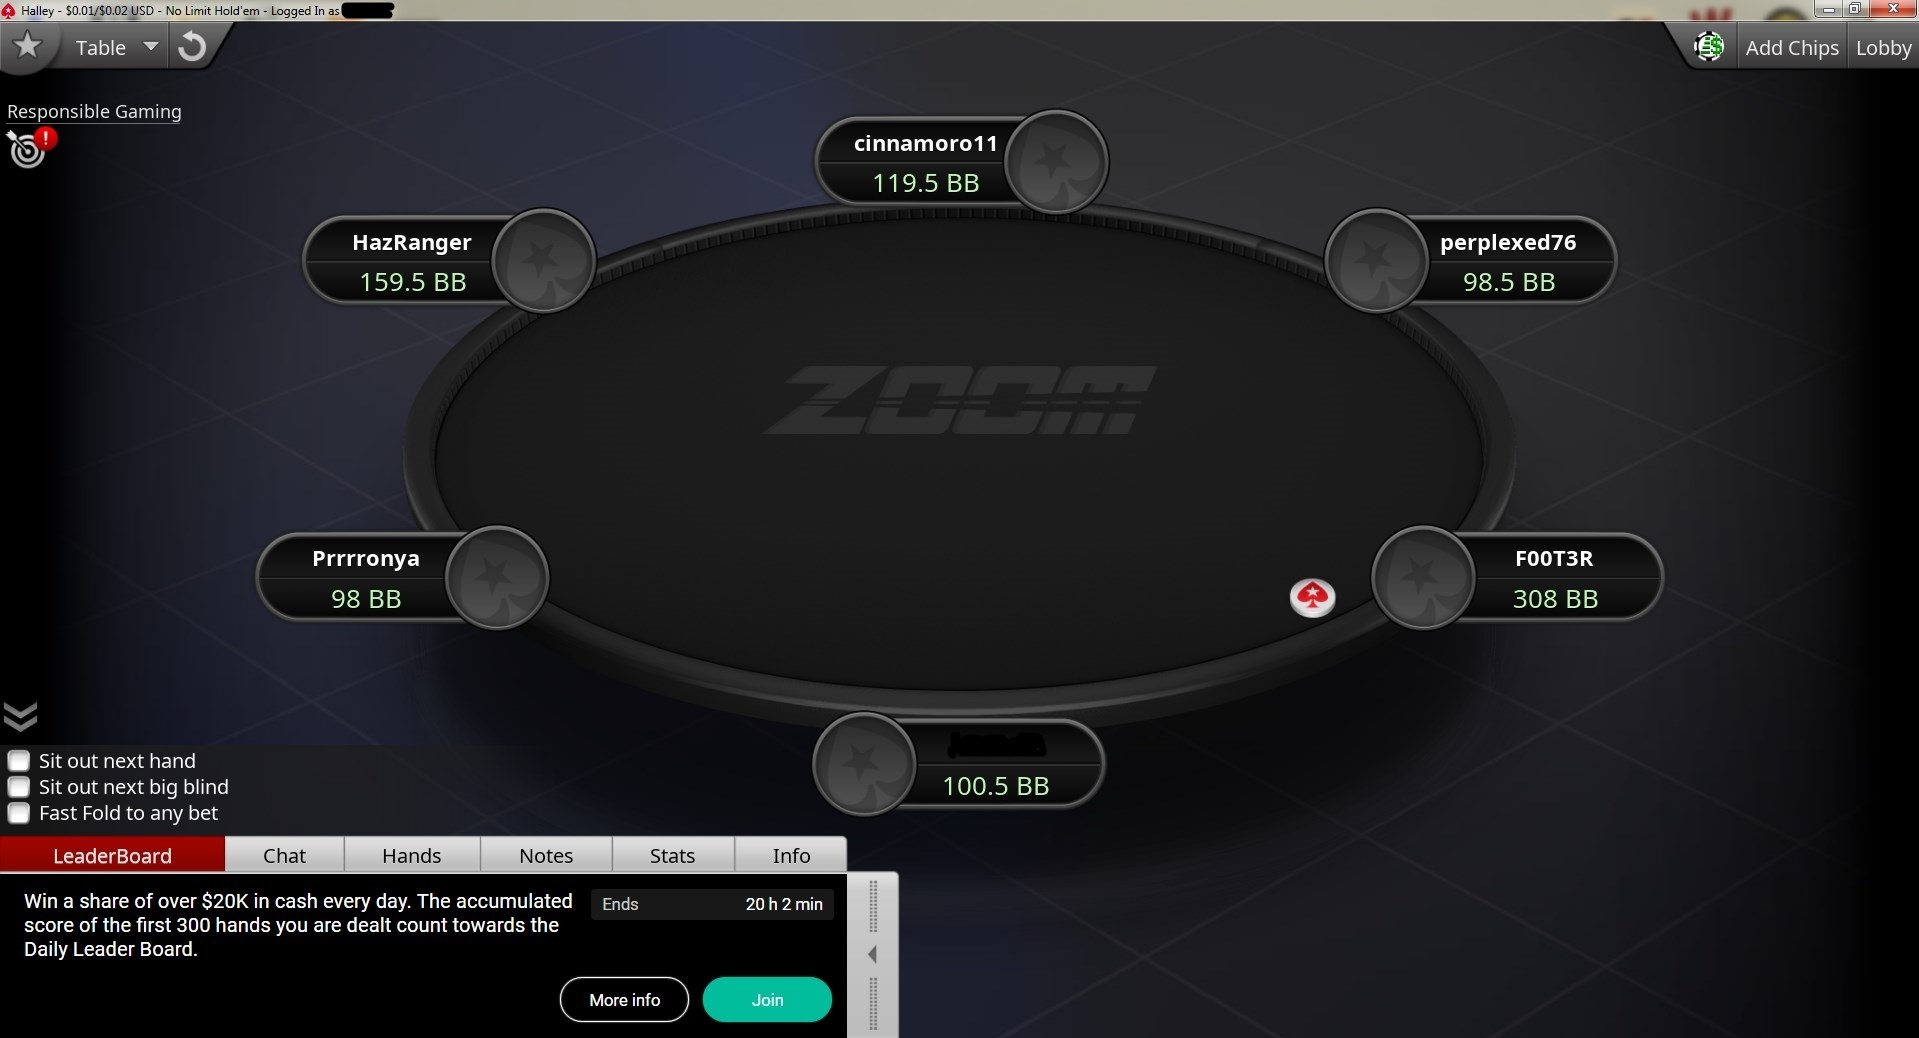 Zoom on poker stars became more popular when a restriction on multi-tabling was introduced. 